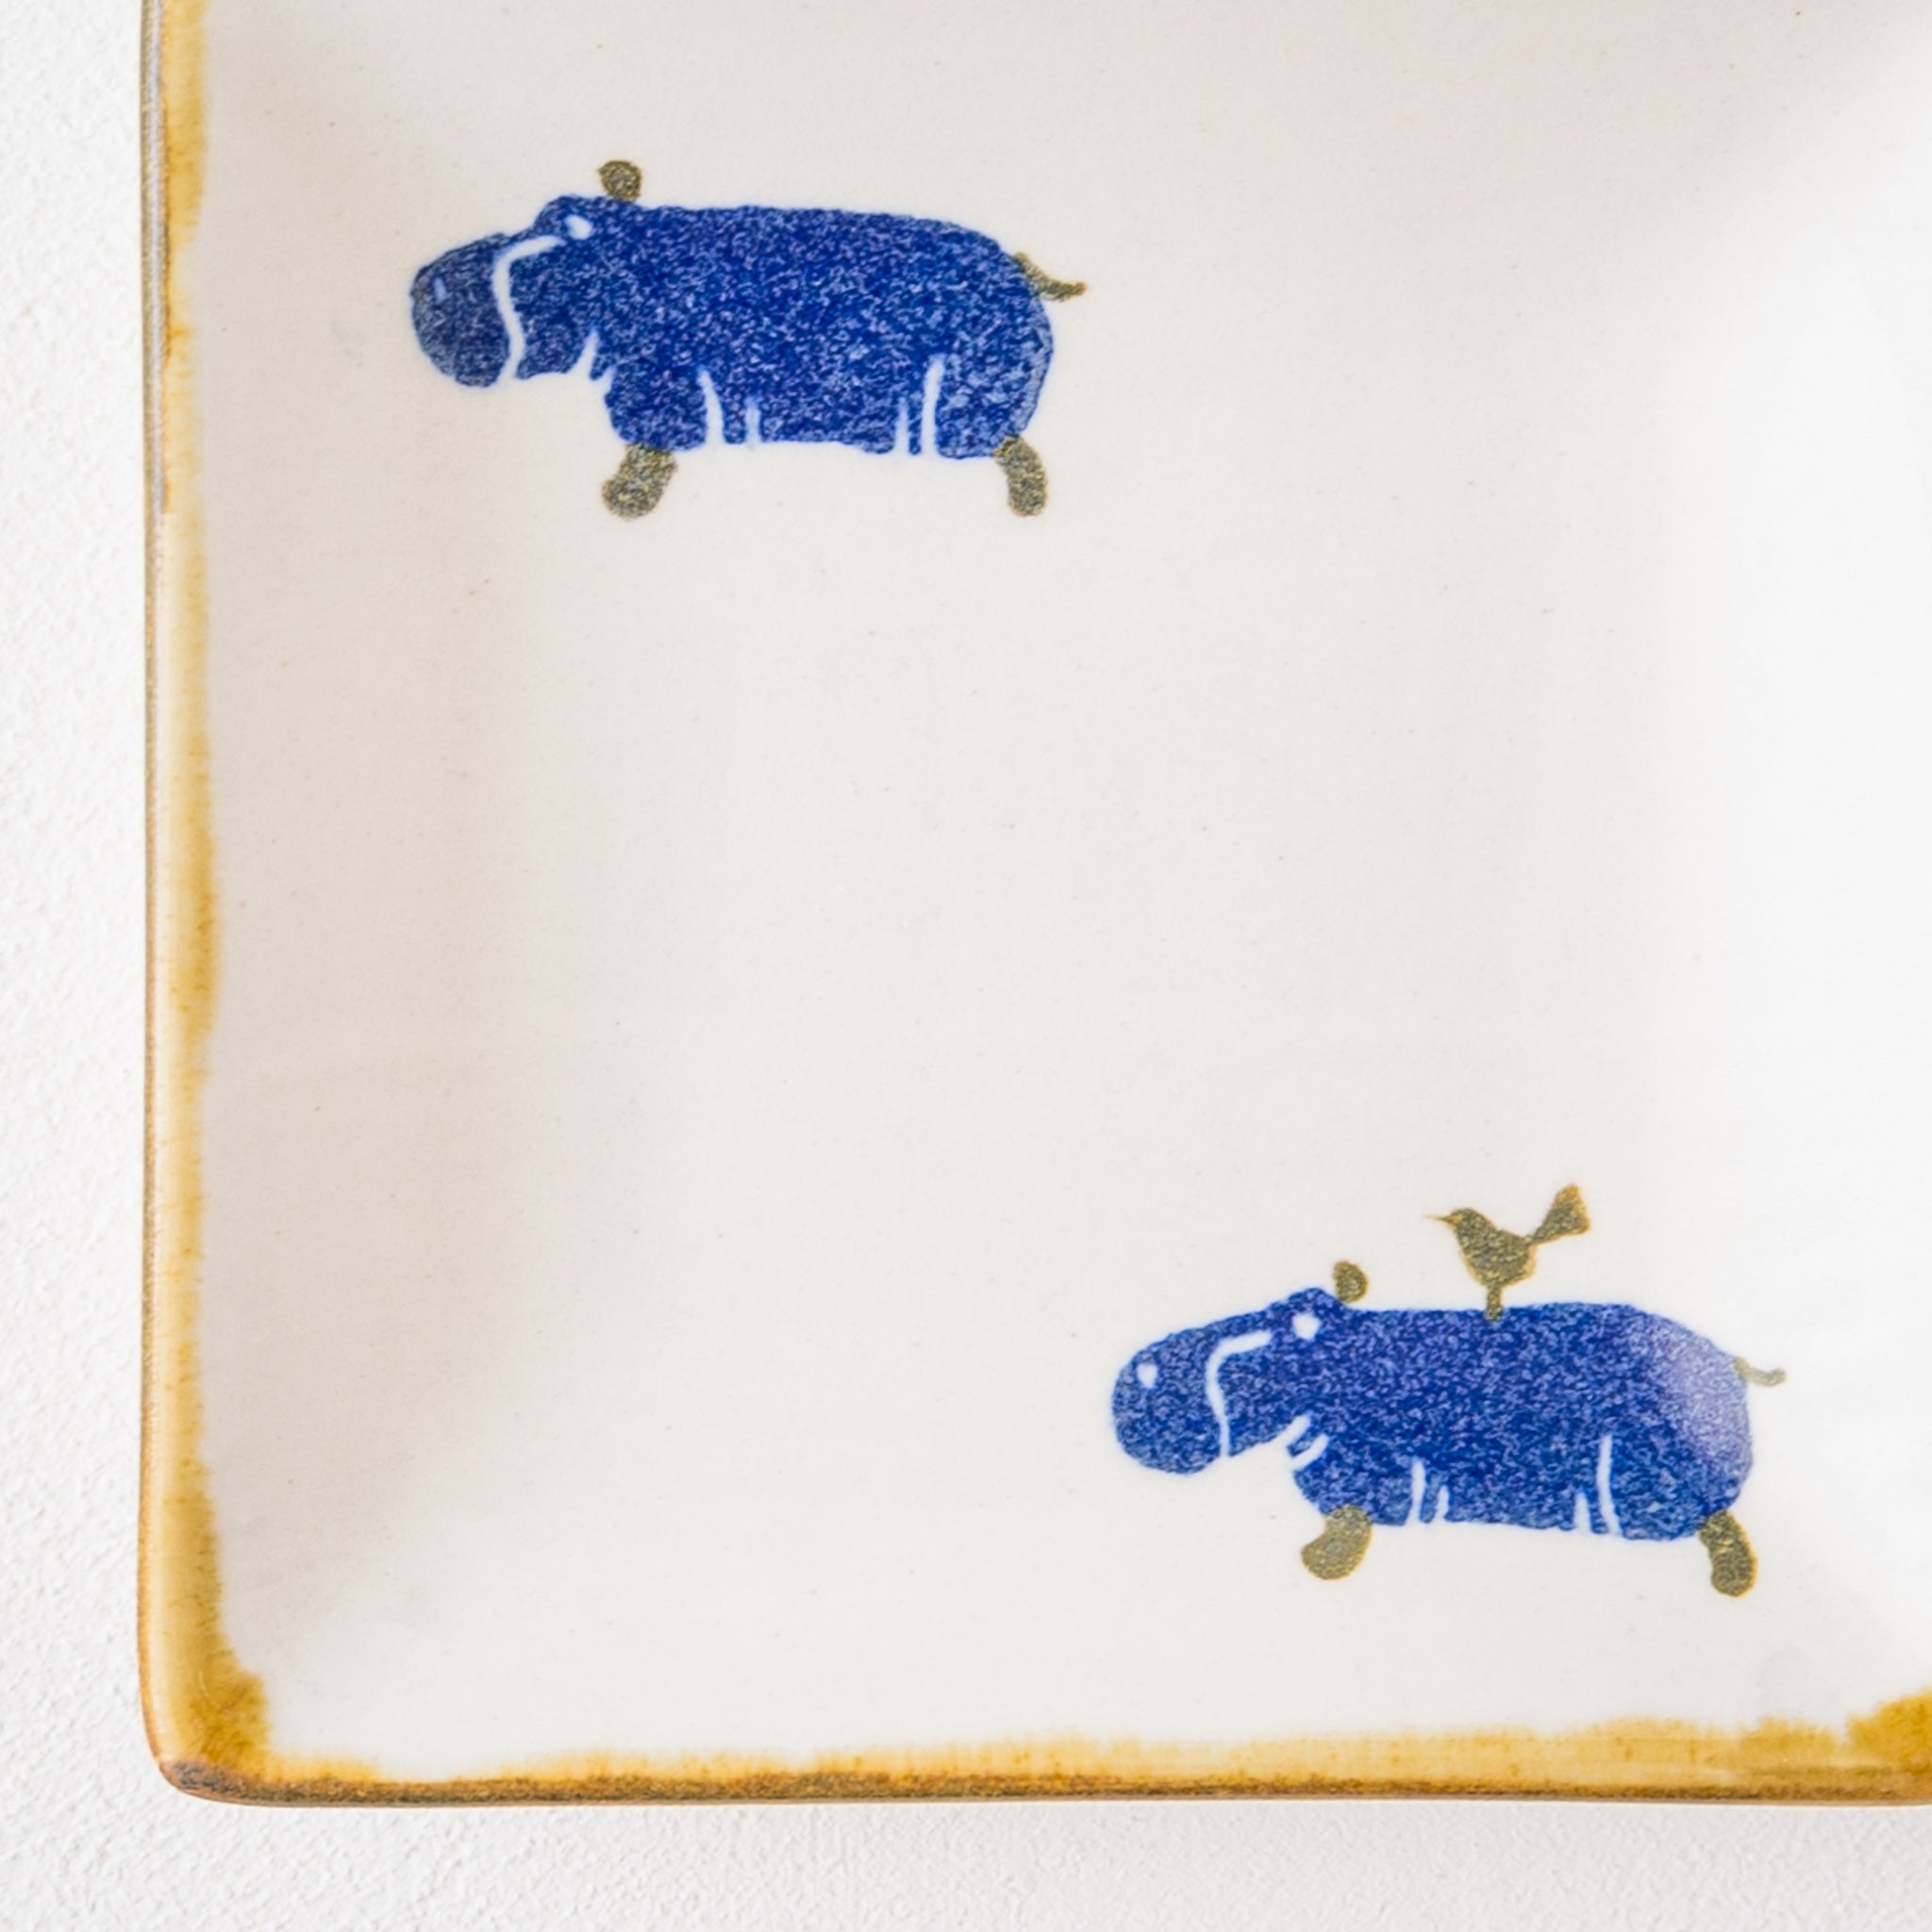 A small square plate from Yasumi Koubou where you can be healed by dyeing a cute hippopotamus on Japanese paper